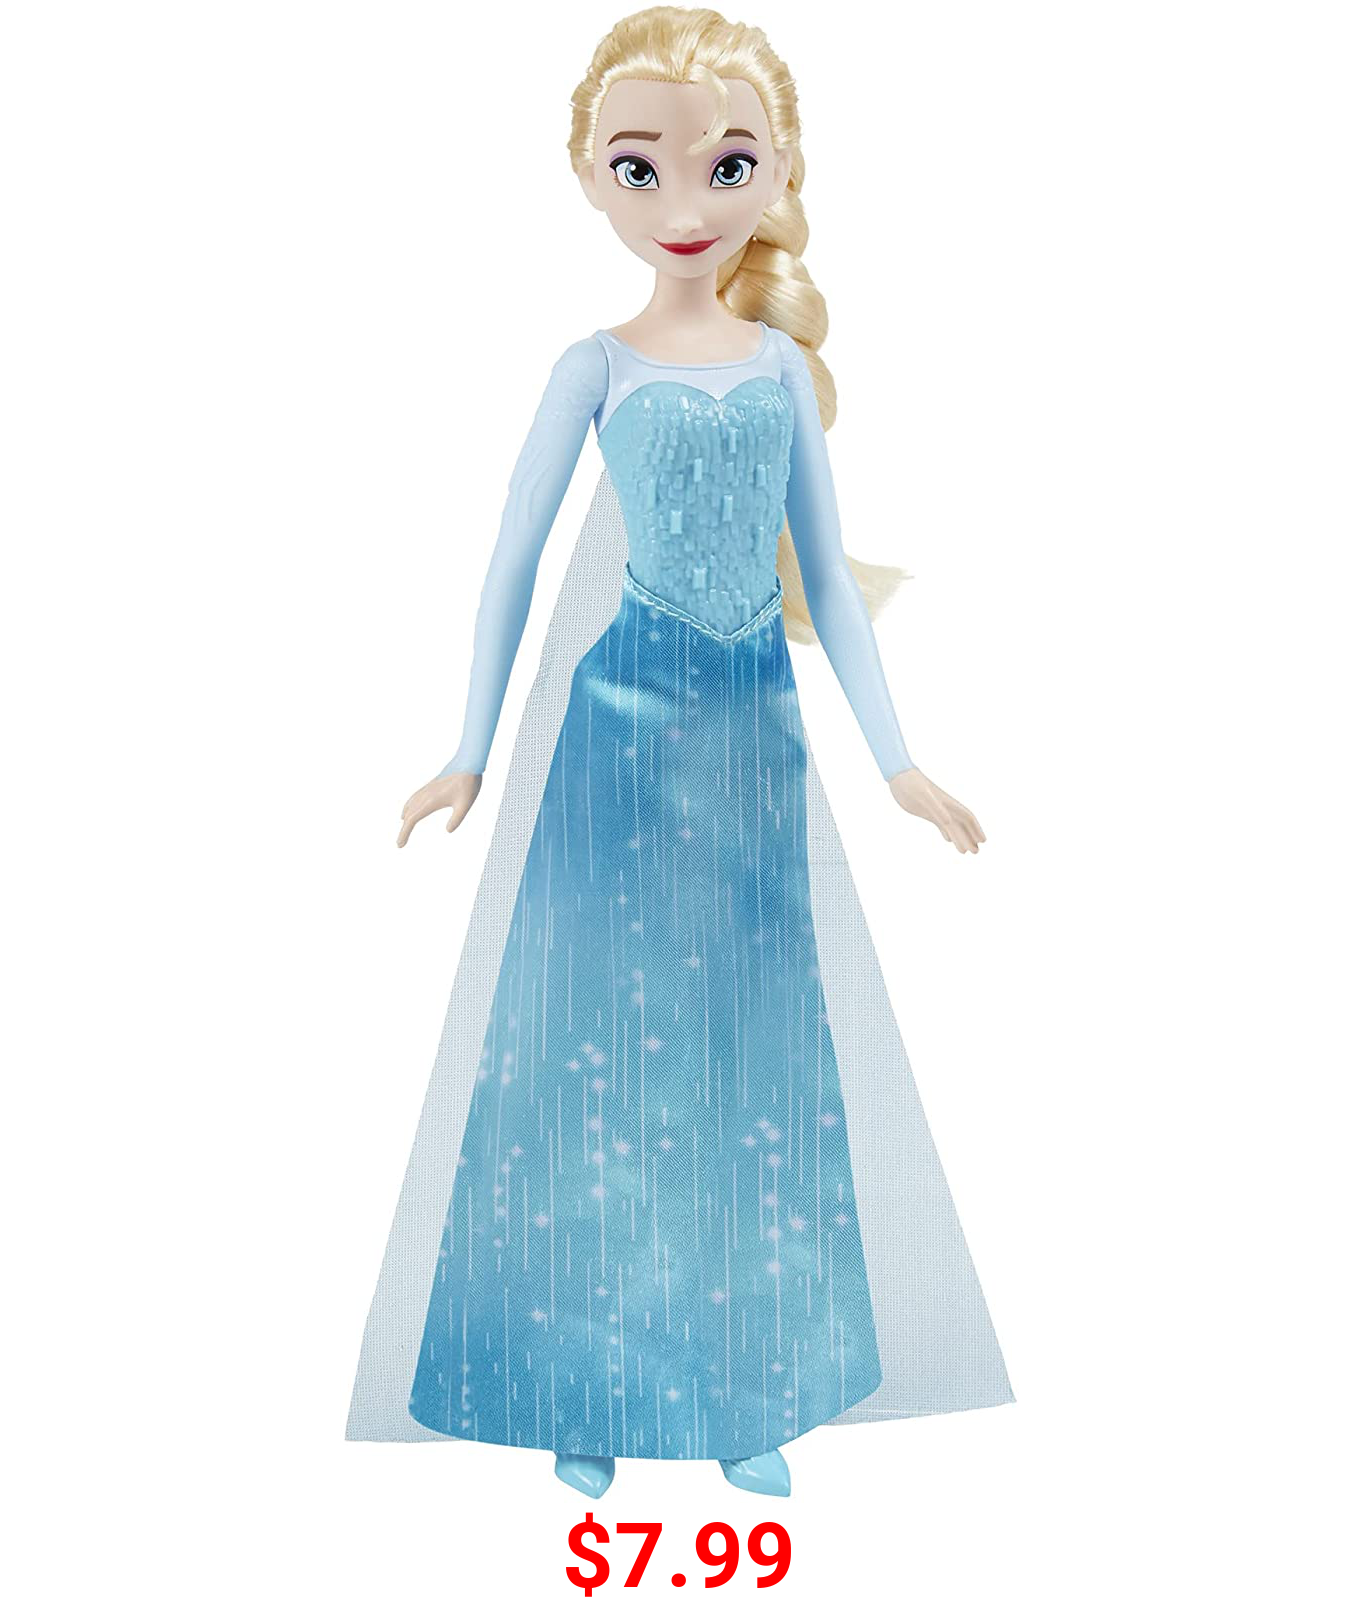 Disney Frozen Shimmer Elsa Fashion Doll, Skirt, Shoes, and Long Blonde Hair, Toy for Kids 3 Years Old and Up